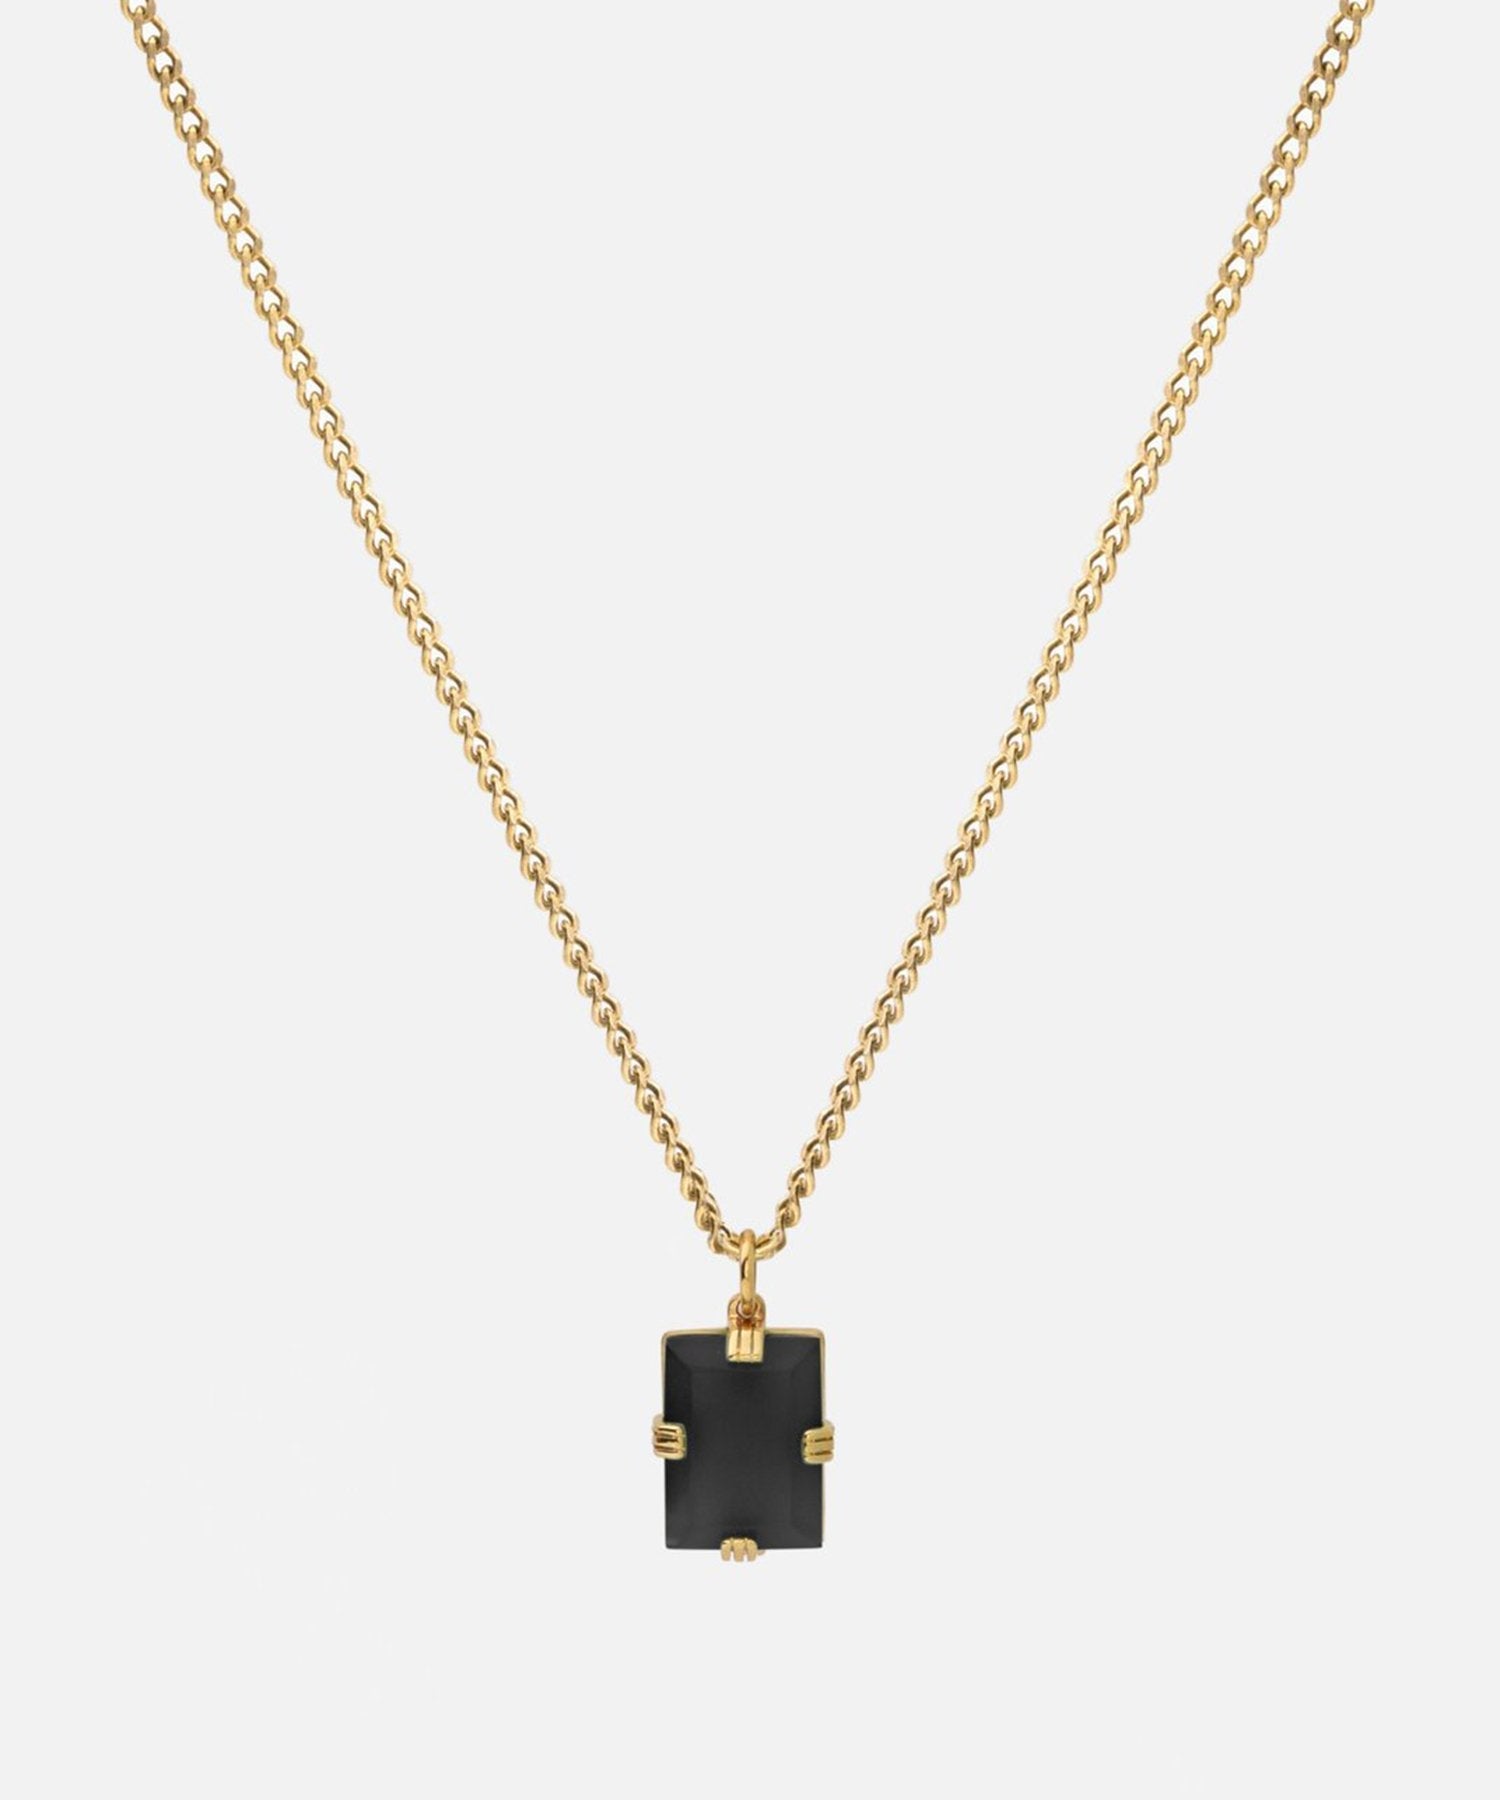 Miansai Lennox Necklace in Gold Vermiel and Onyx